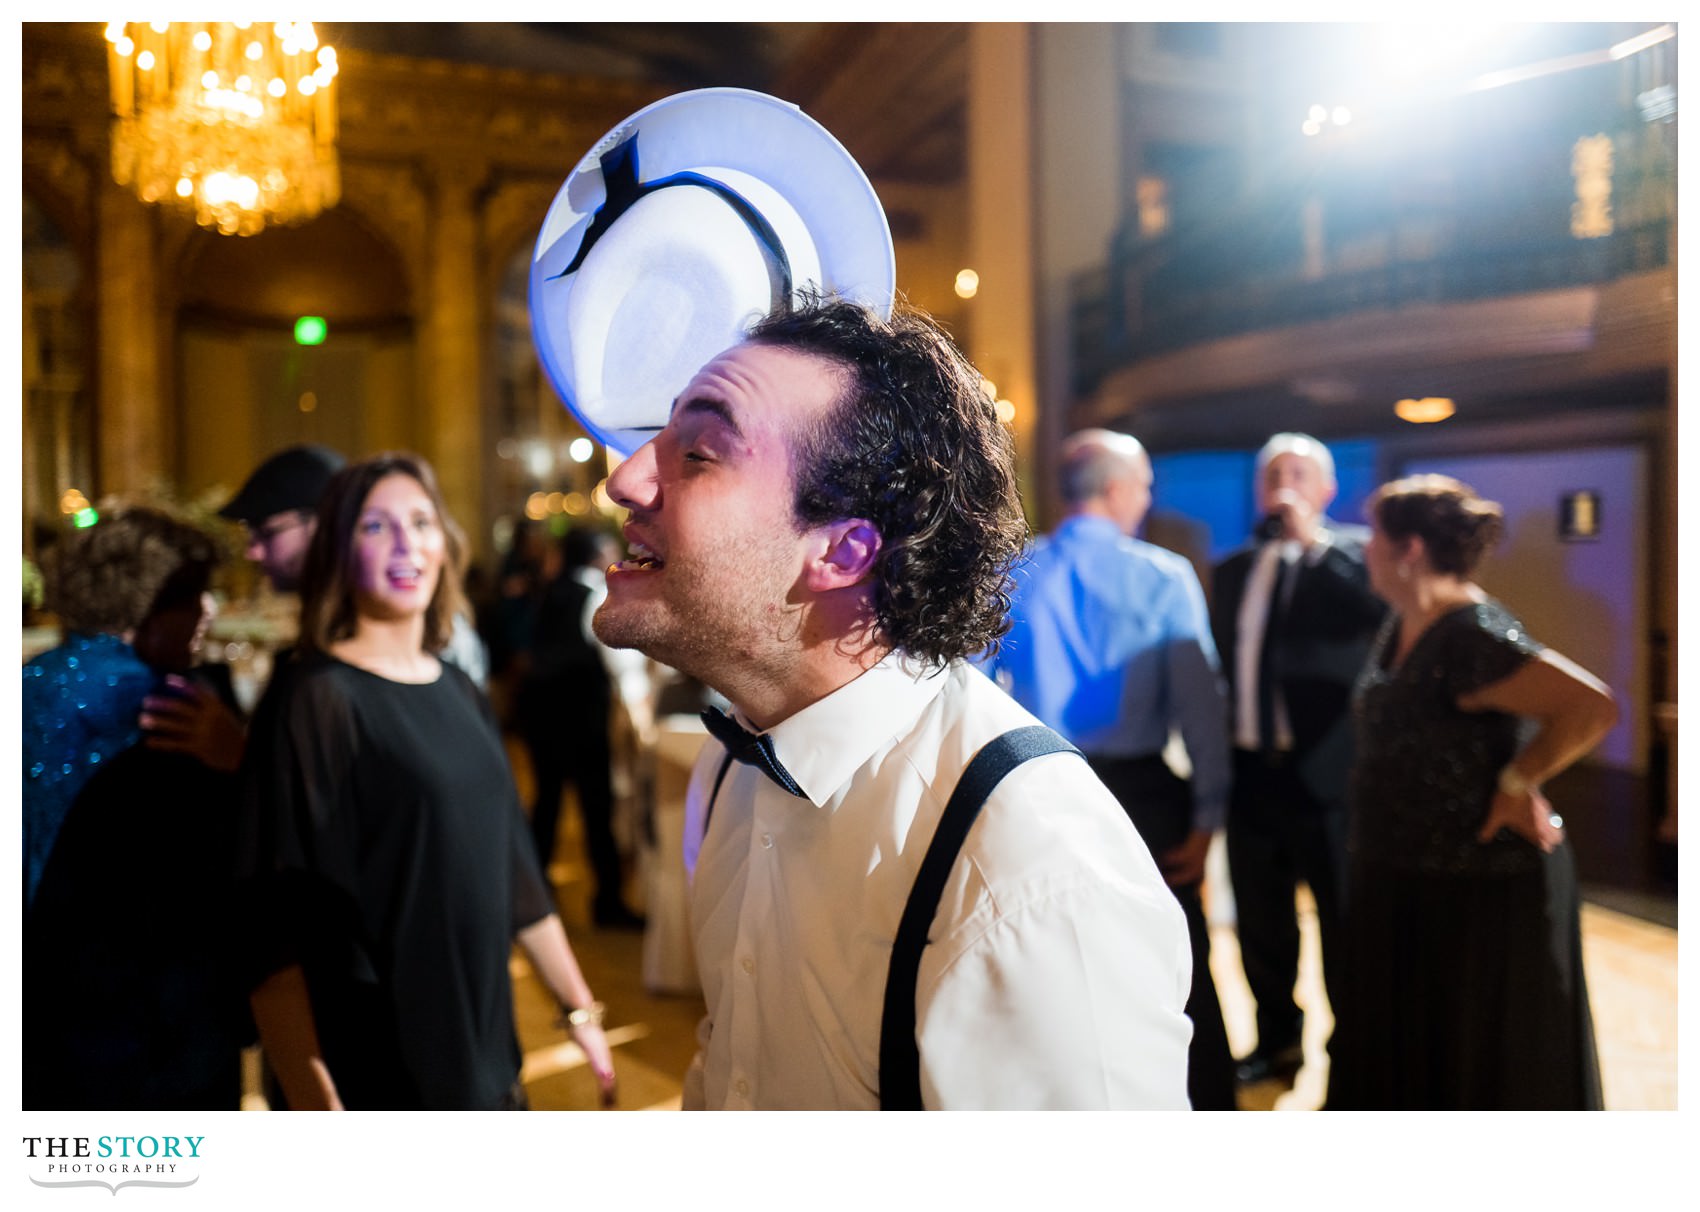 man attempts to catch a hat on his head at wedding reception